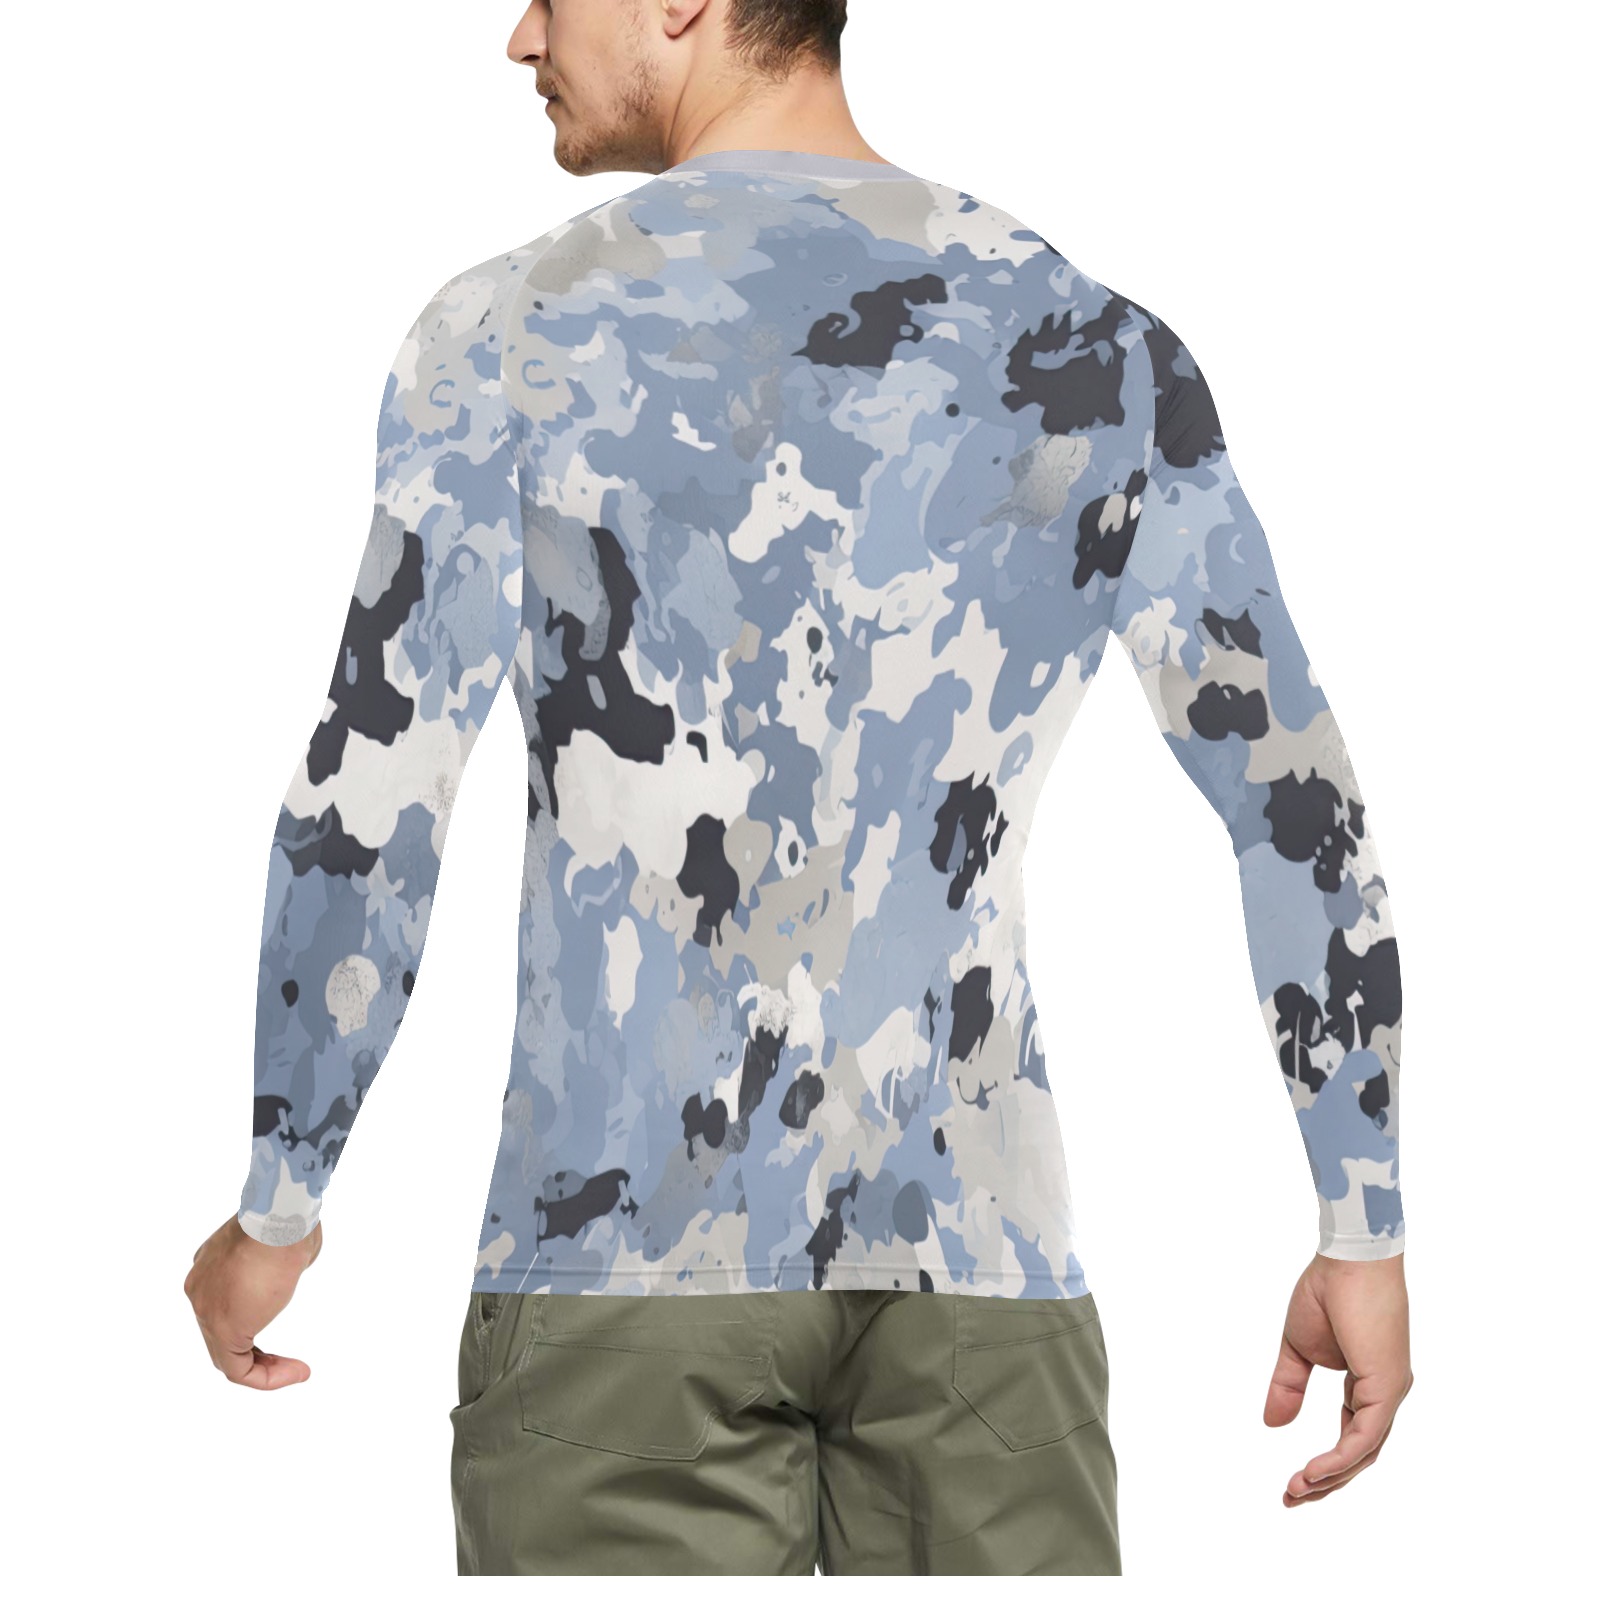 CG_camo_print_in_grey_blue_and_black_in_the_style_of_pointillis_dd2dd455-e628-447d-b69c-e71027b6f83a Men's Long Sleeve Swim Shirt (Model S39)